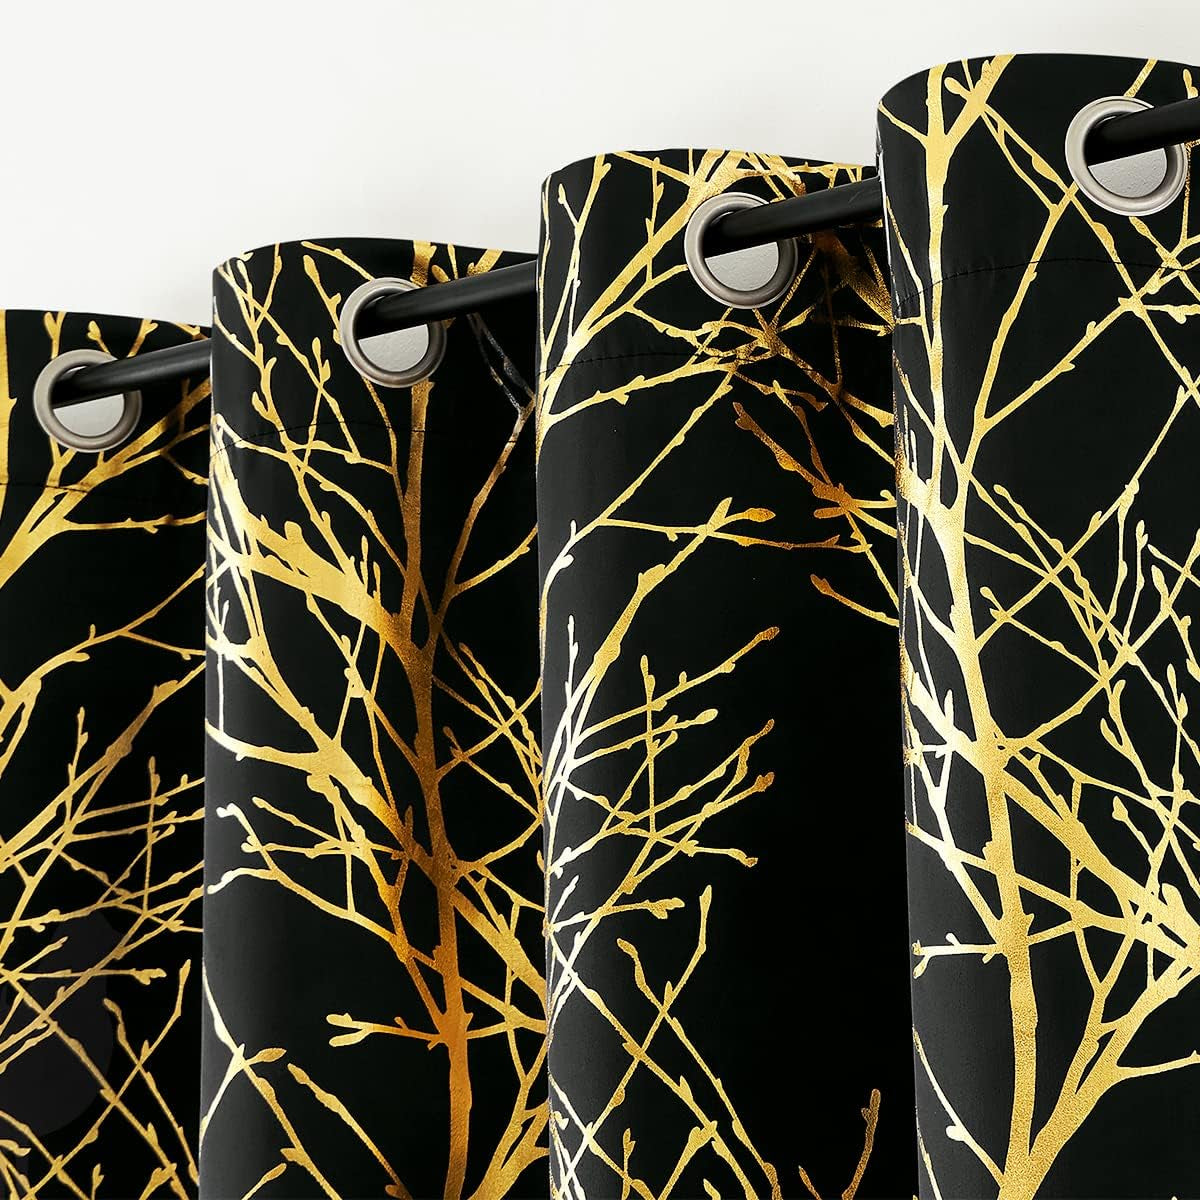 FMFUNCTEX Metallic Tree Blackout Curtains Bedroom Grey 84-Inch Living-Room Branch Print Curtain Panels Forest Triple Weave Thermal Insulated Drapes for Windows Dorm Hotel Grommet Top, 2Panels  Fmfunctex Gold /Black 50"W X 96"L 2Pcs 